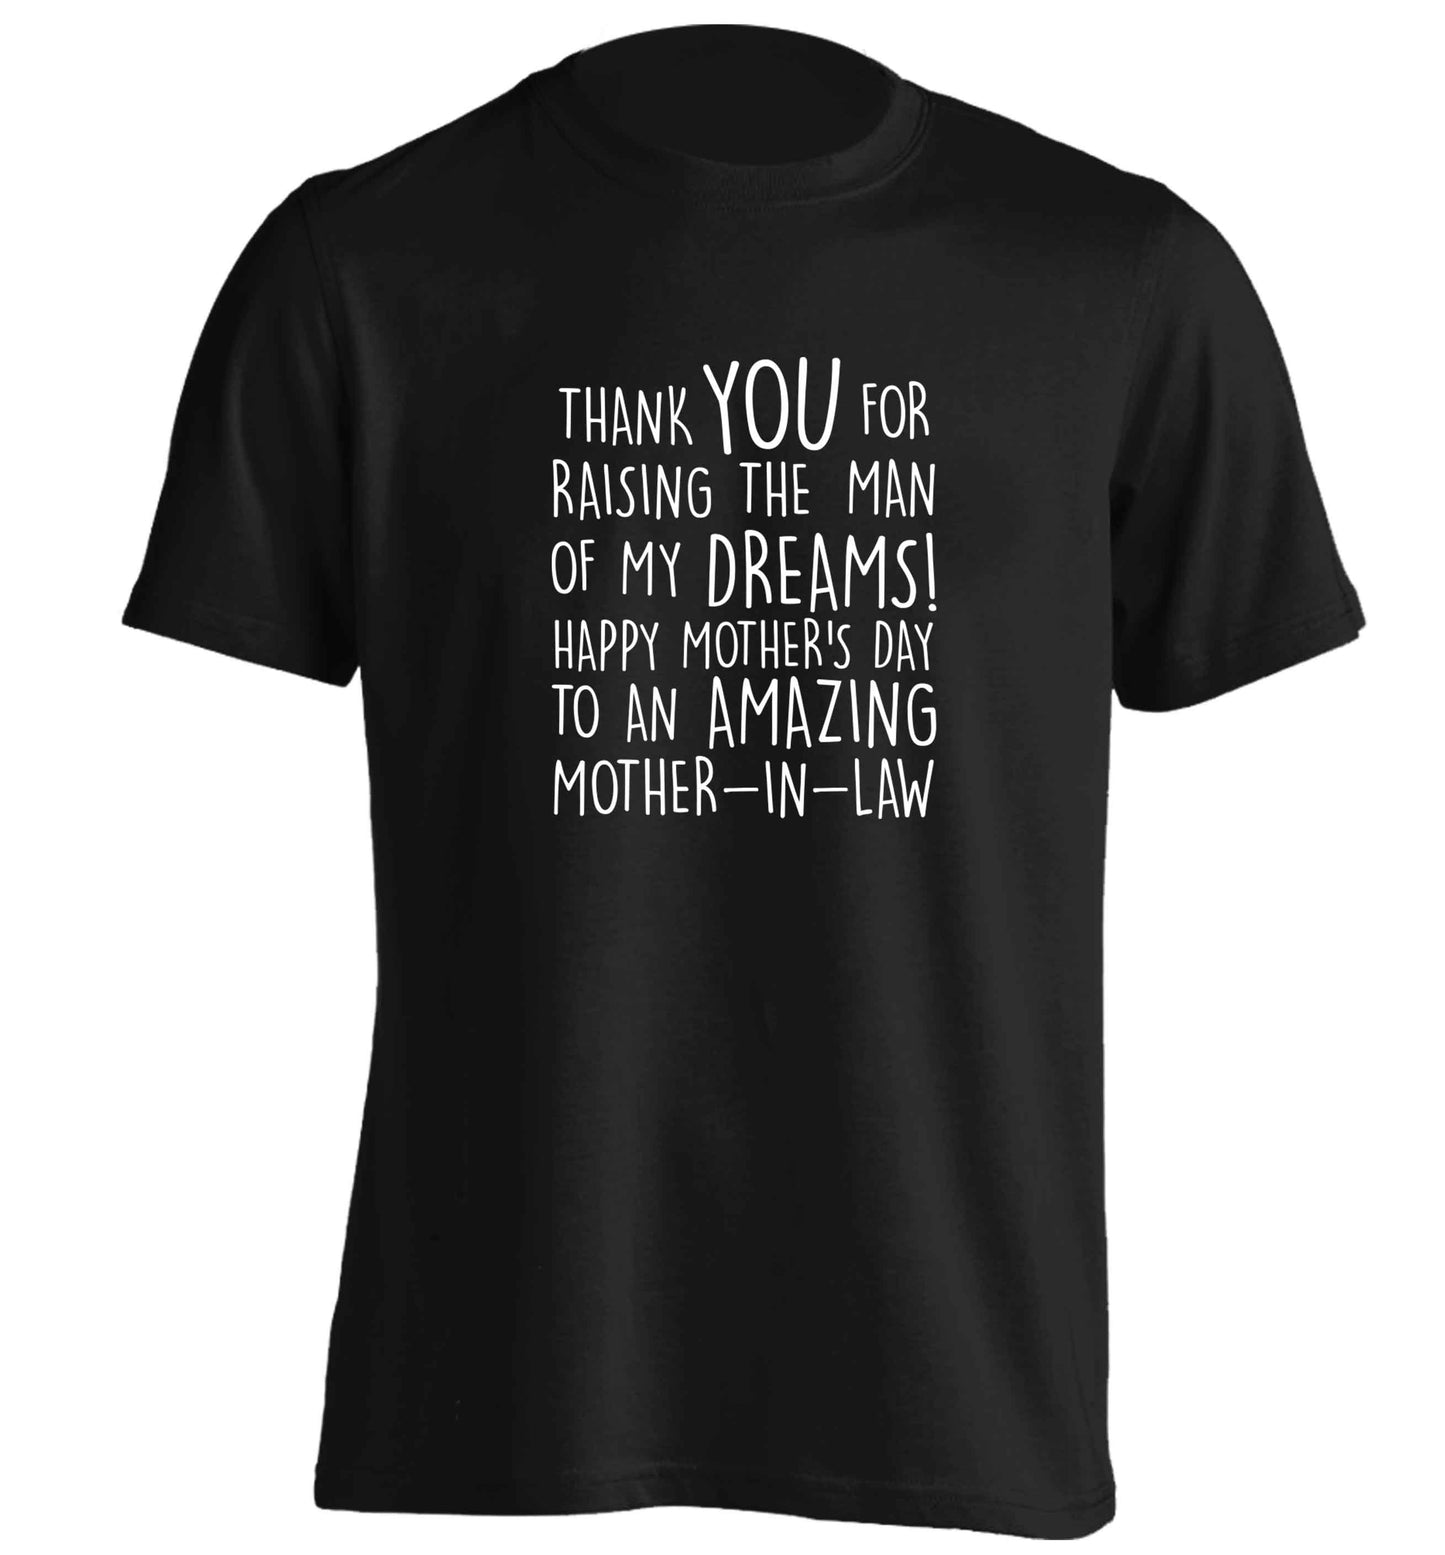 Raising the man of my dreams mother's day mother-in-law adults unisex black Tshirt 2XL